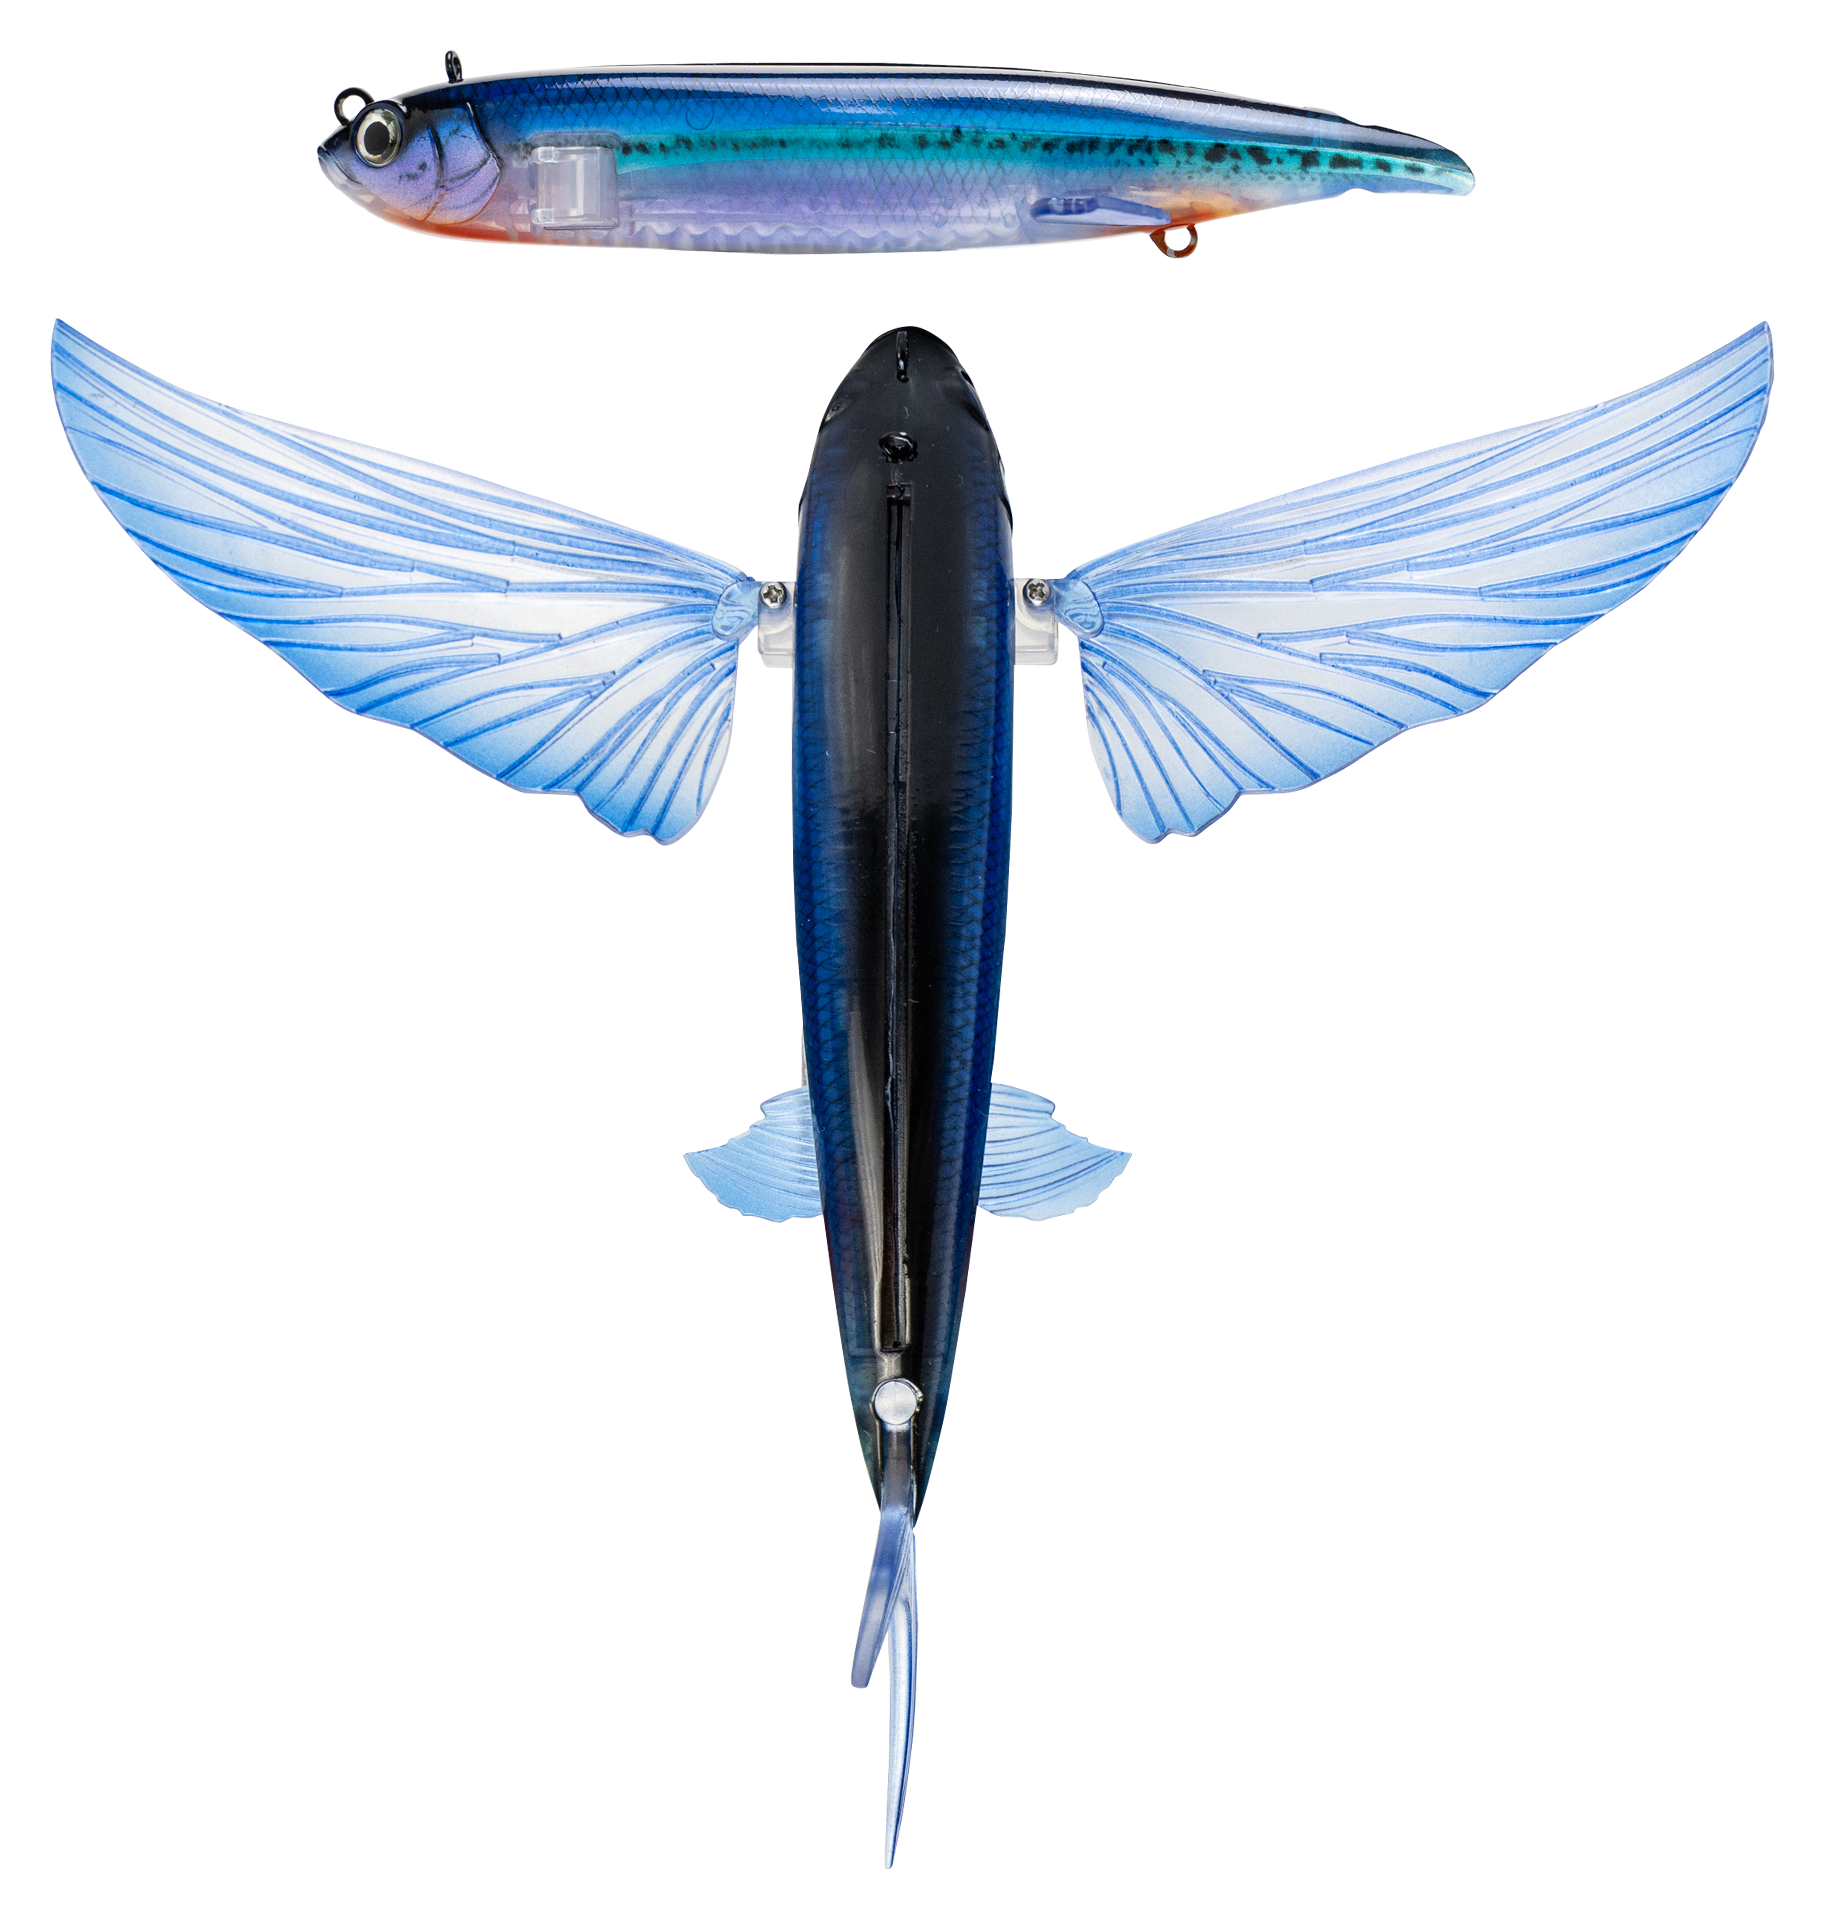 Nomad Design Slipstream Flying Fish Lure - 8″ - Electric